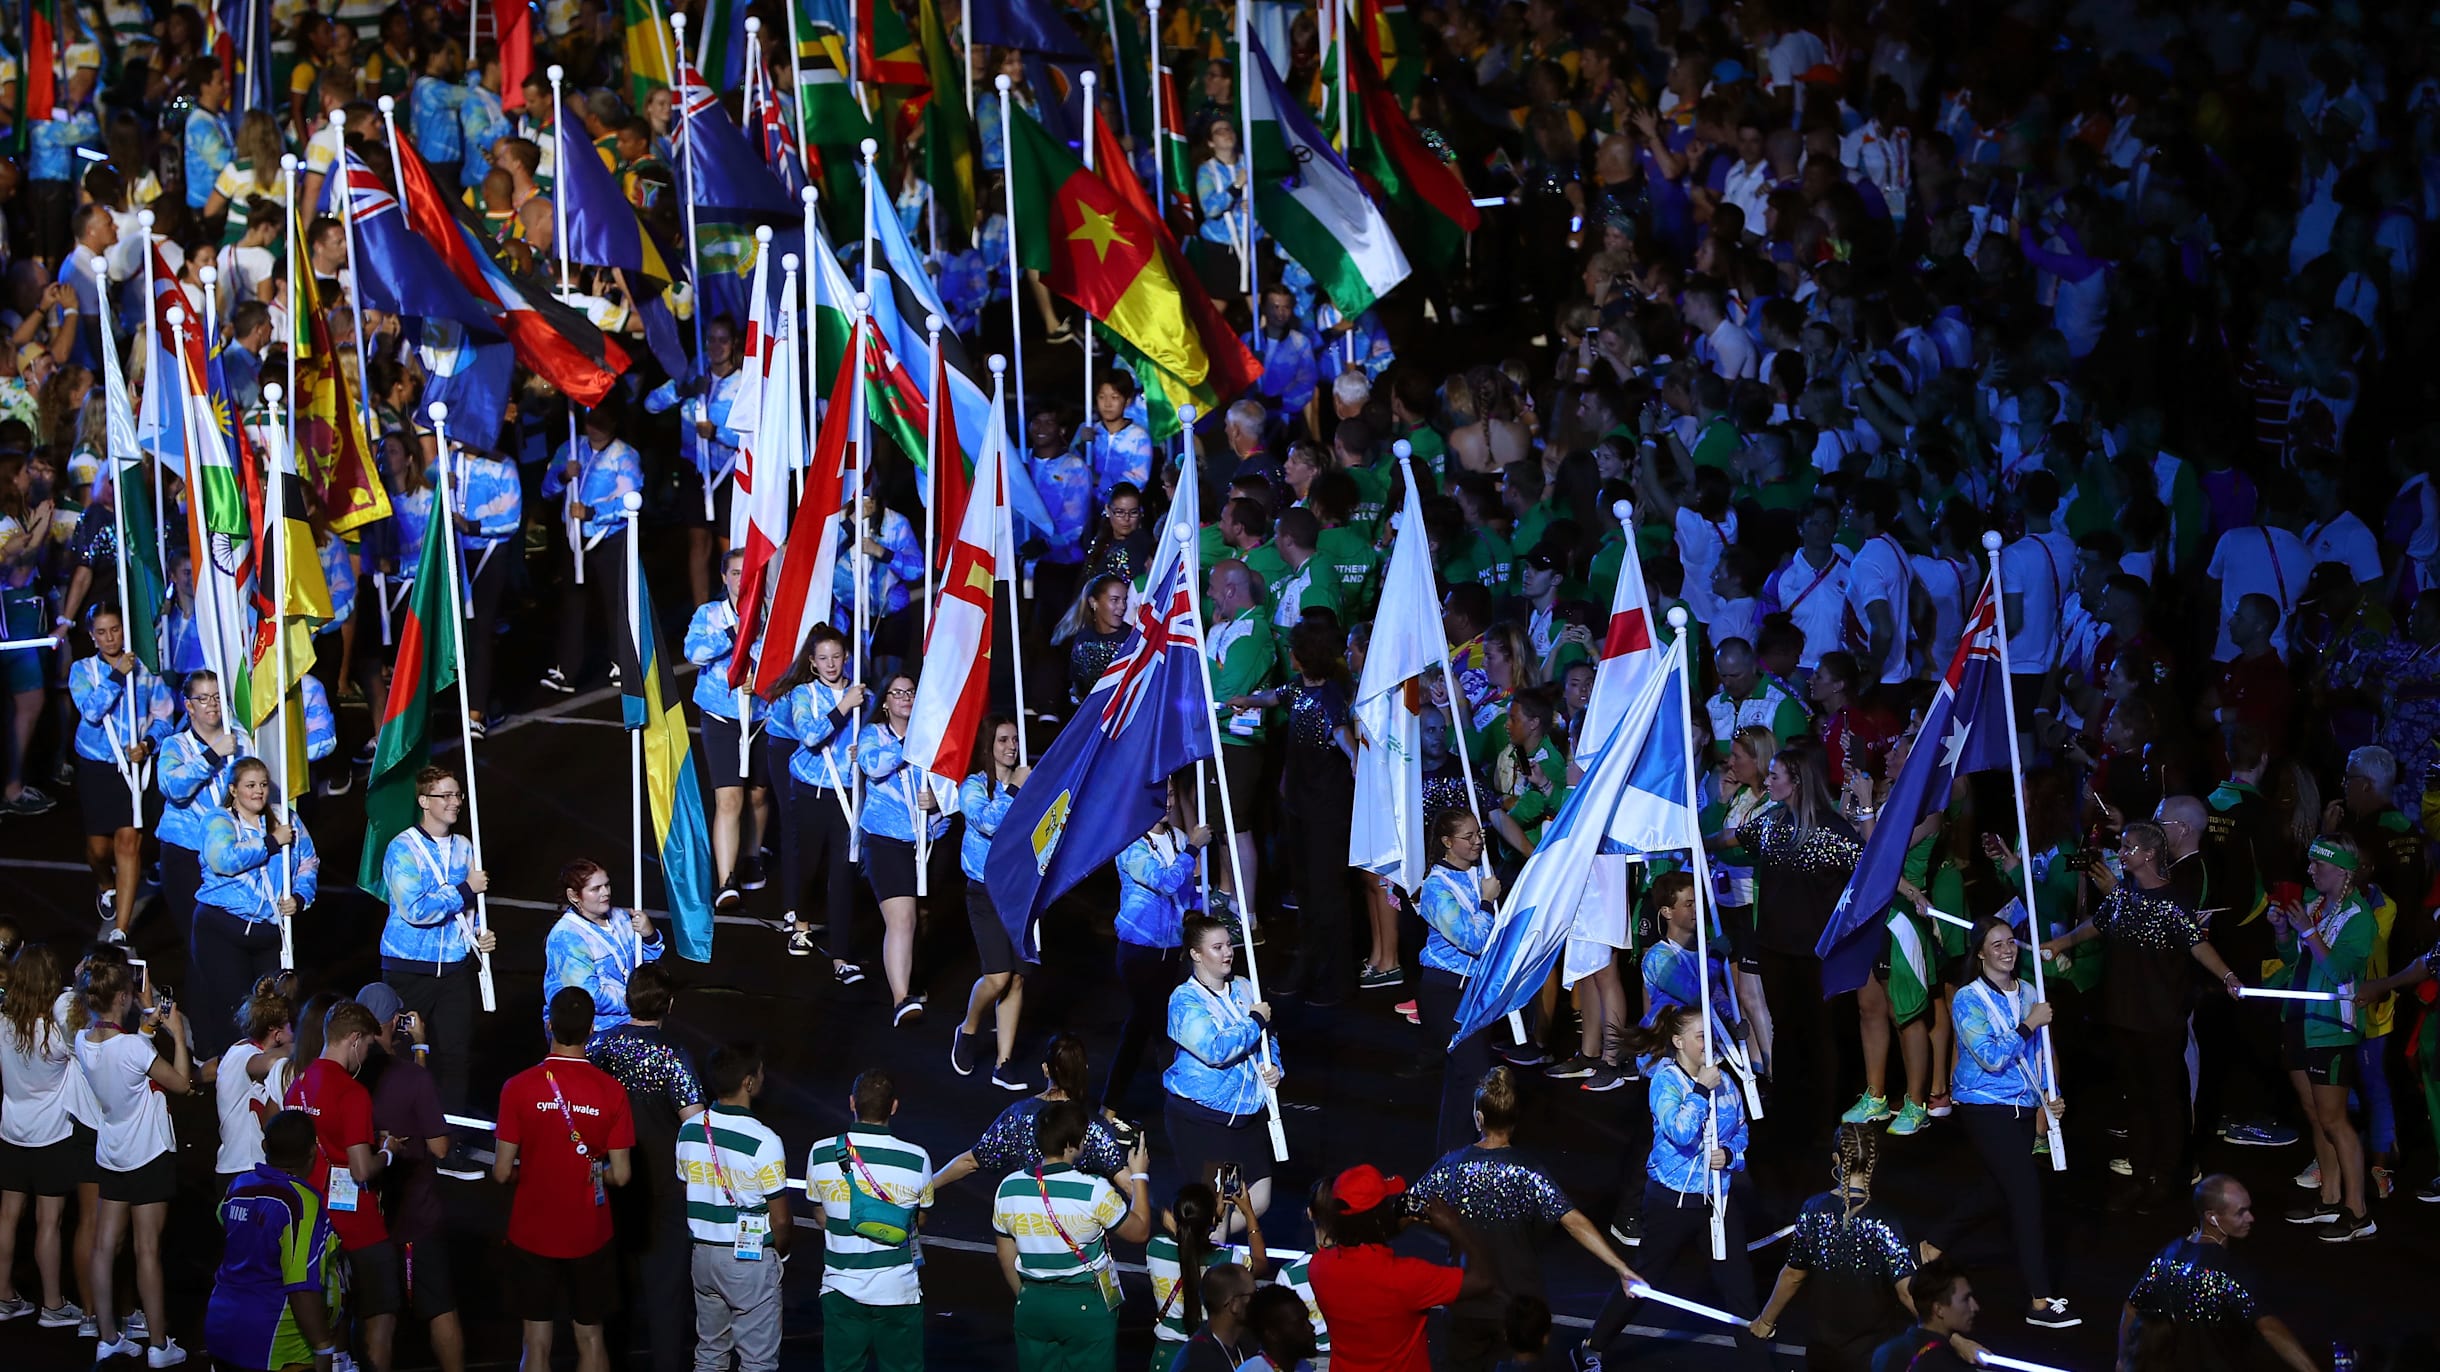 How many countries participate in Commonwealth Games?